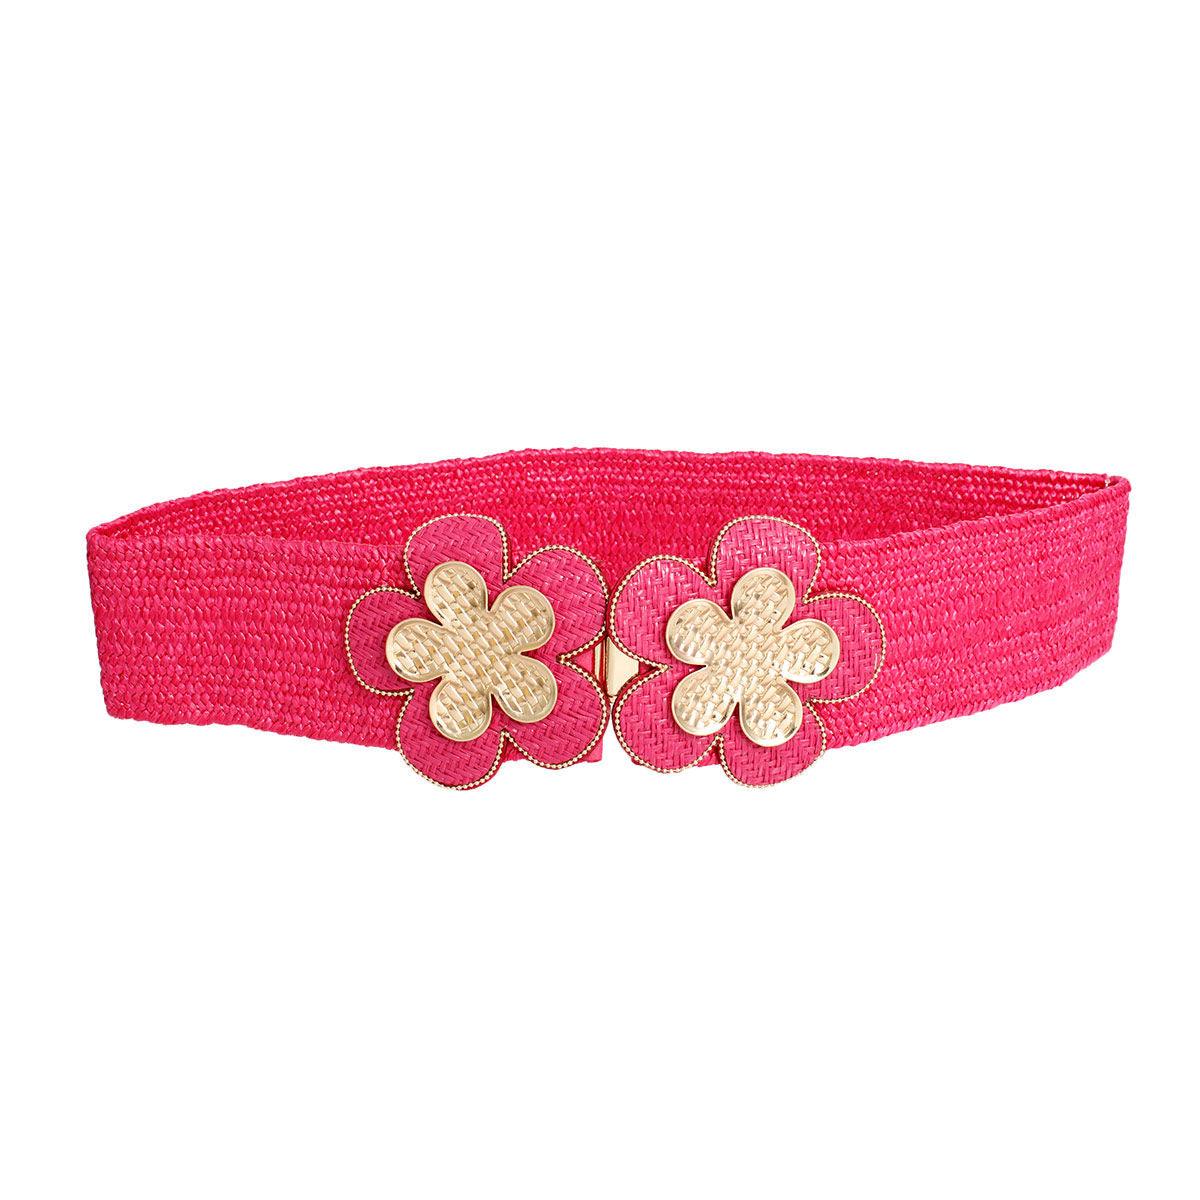 Fuchsia Raffia Belt with Gold Flower Buckle and Textured Detailing for Women